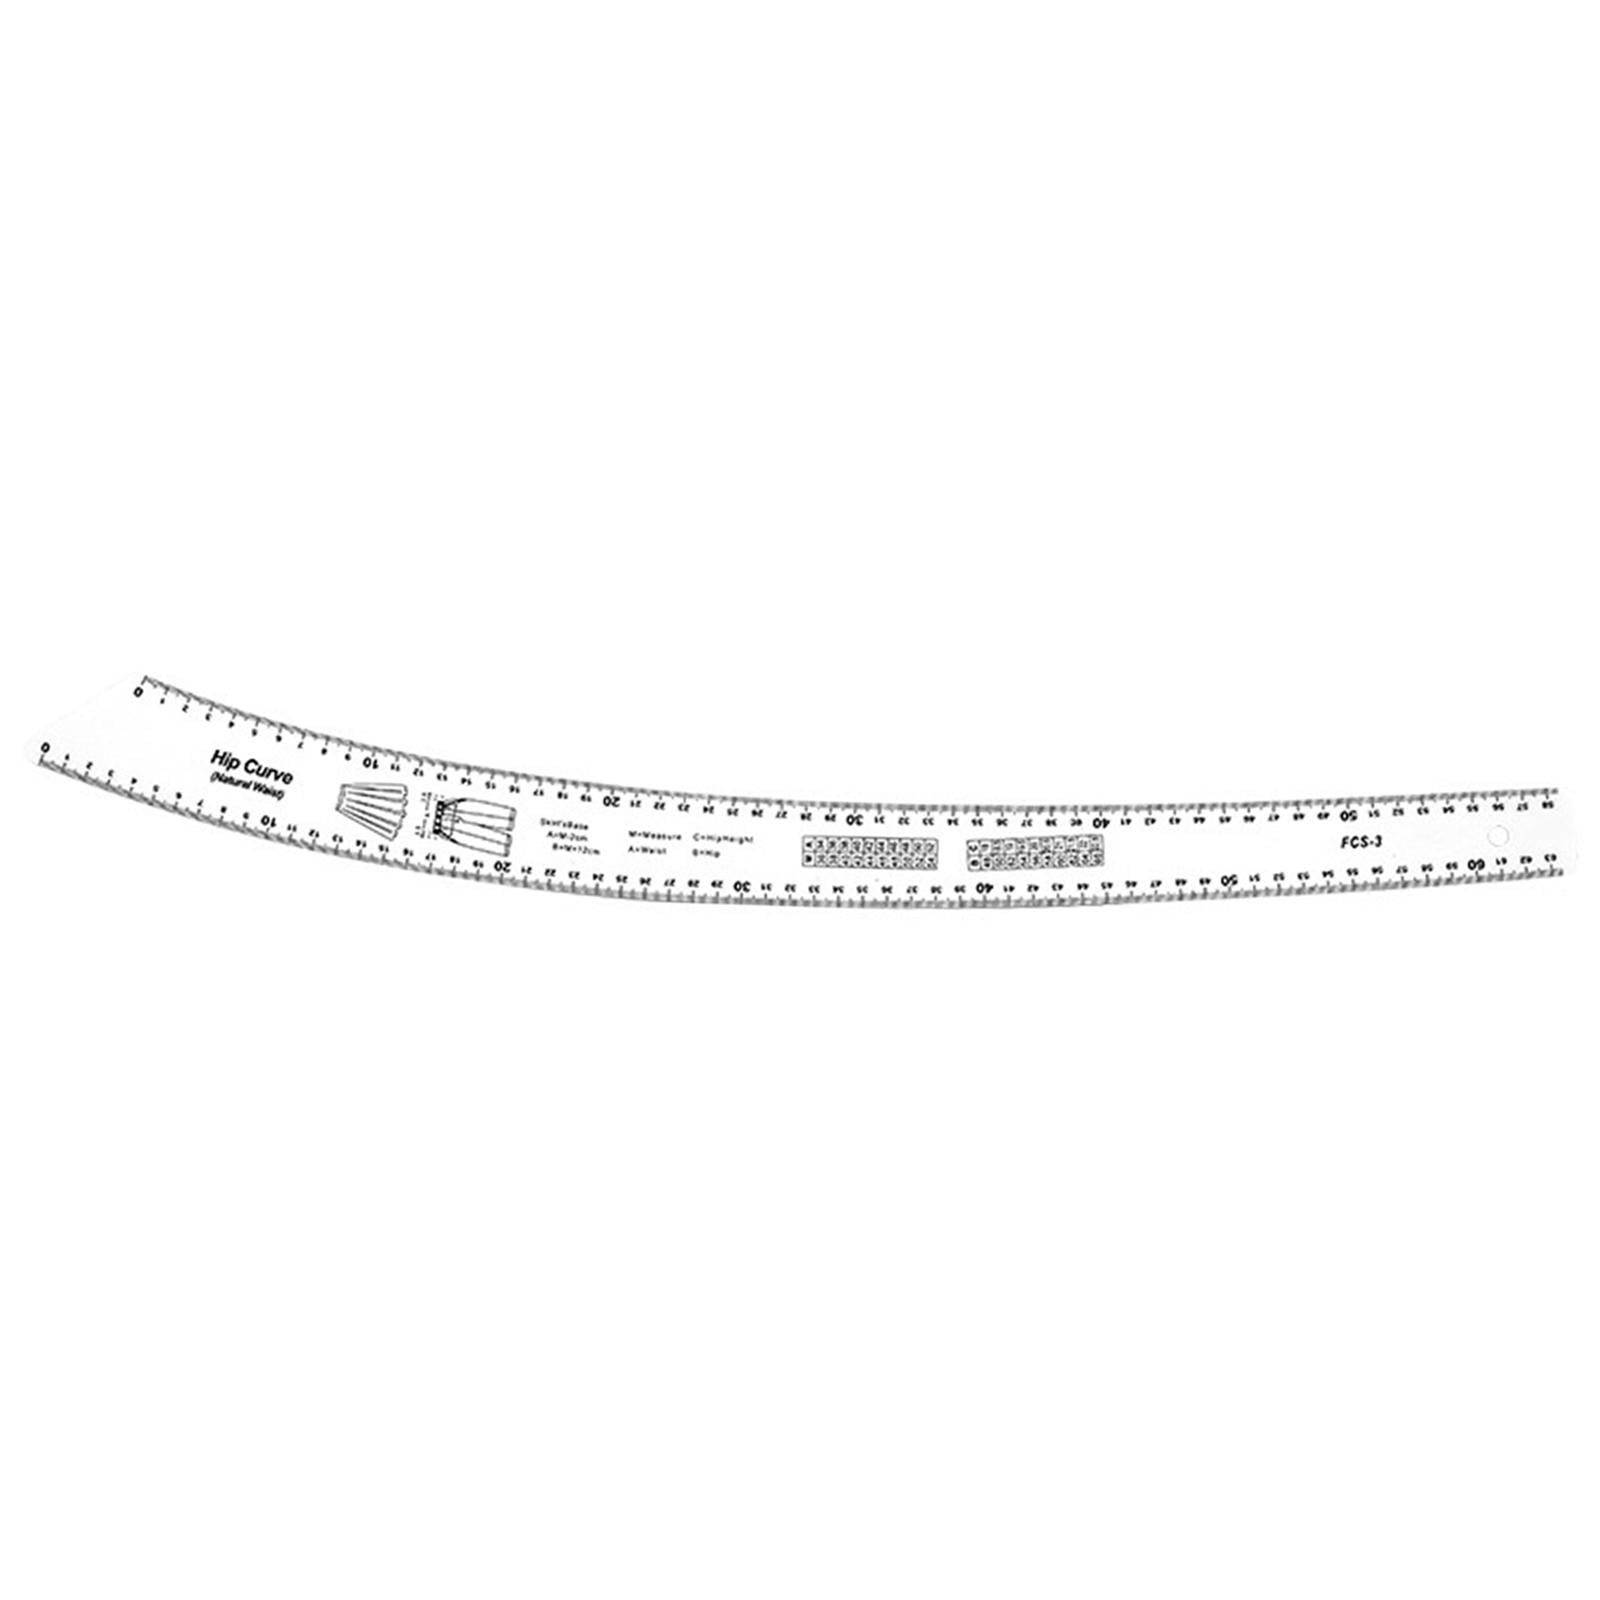 Drafting Fashion Sewing Tool For Doll Tailor Garment Craft Measure Ruler  Design Ruler French Curve Ruler Pattern Making